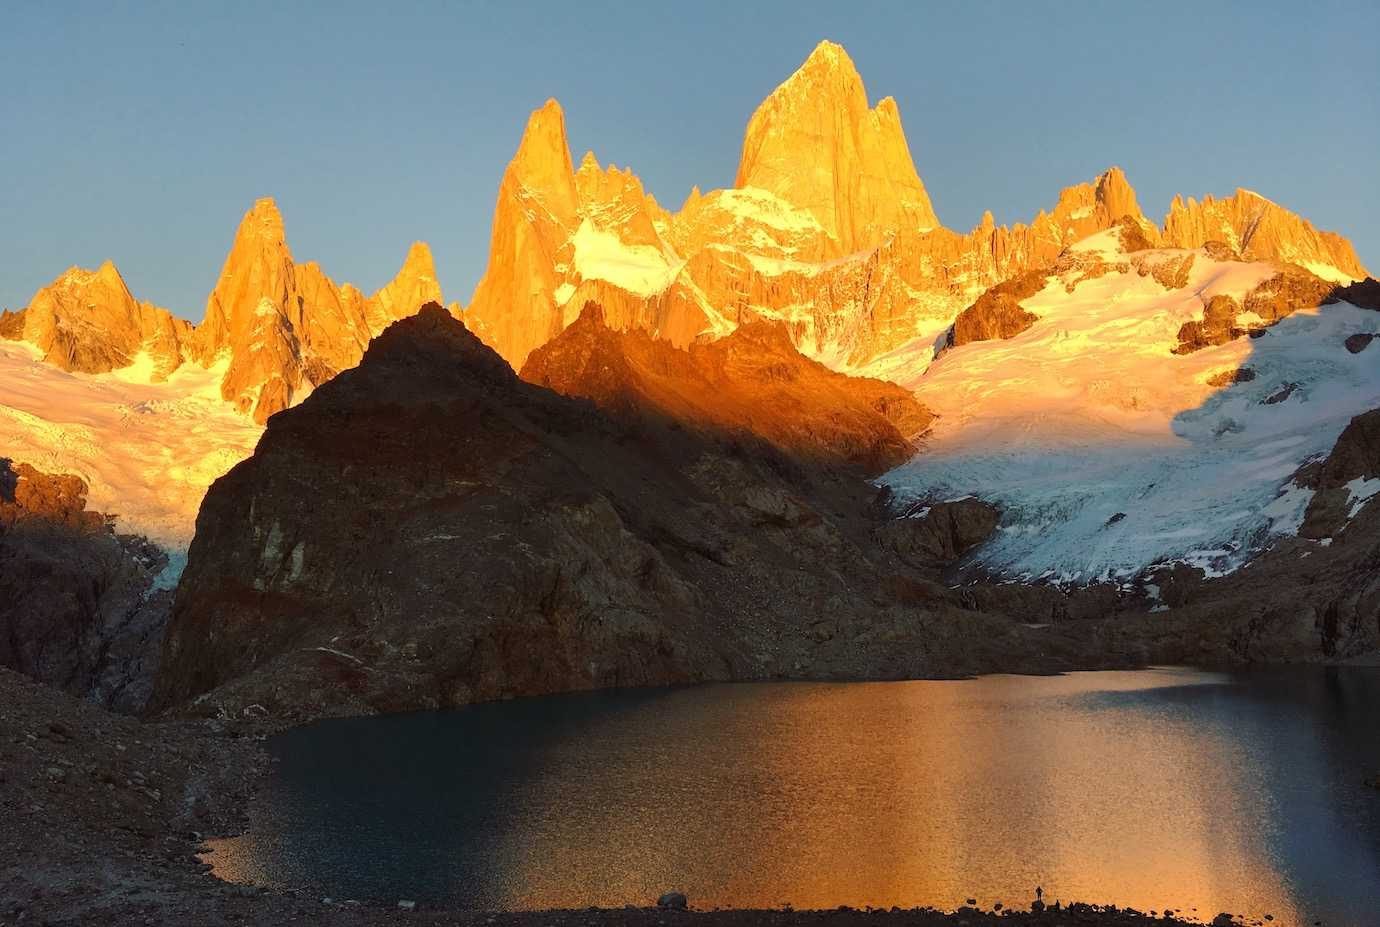 On this Day: Sunrise at Fitz Roy in El Chaltén